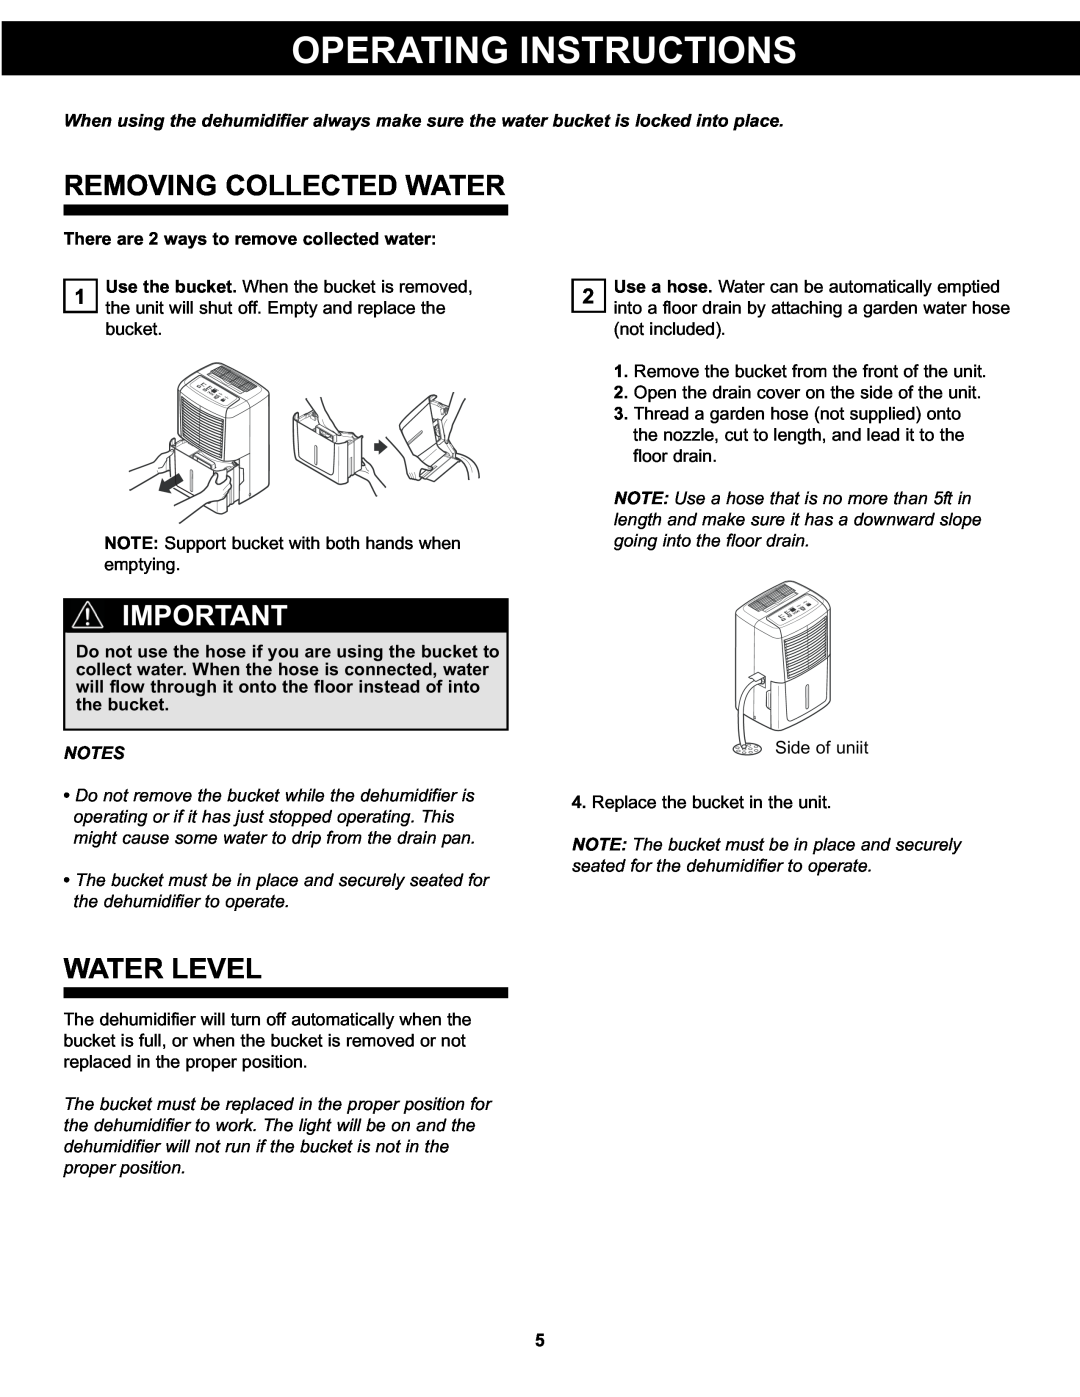 Danby DDR4511 Removing Collected Water, Water Level, There are 2 ways to remove collected water, Operating Instructions 